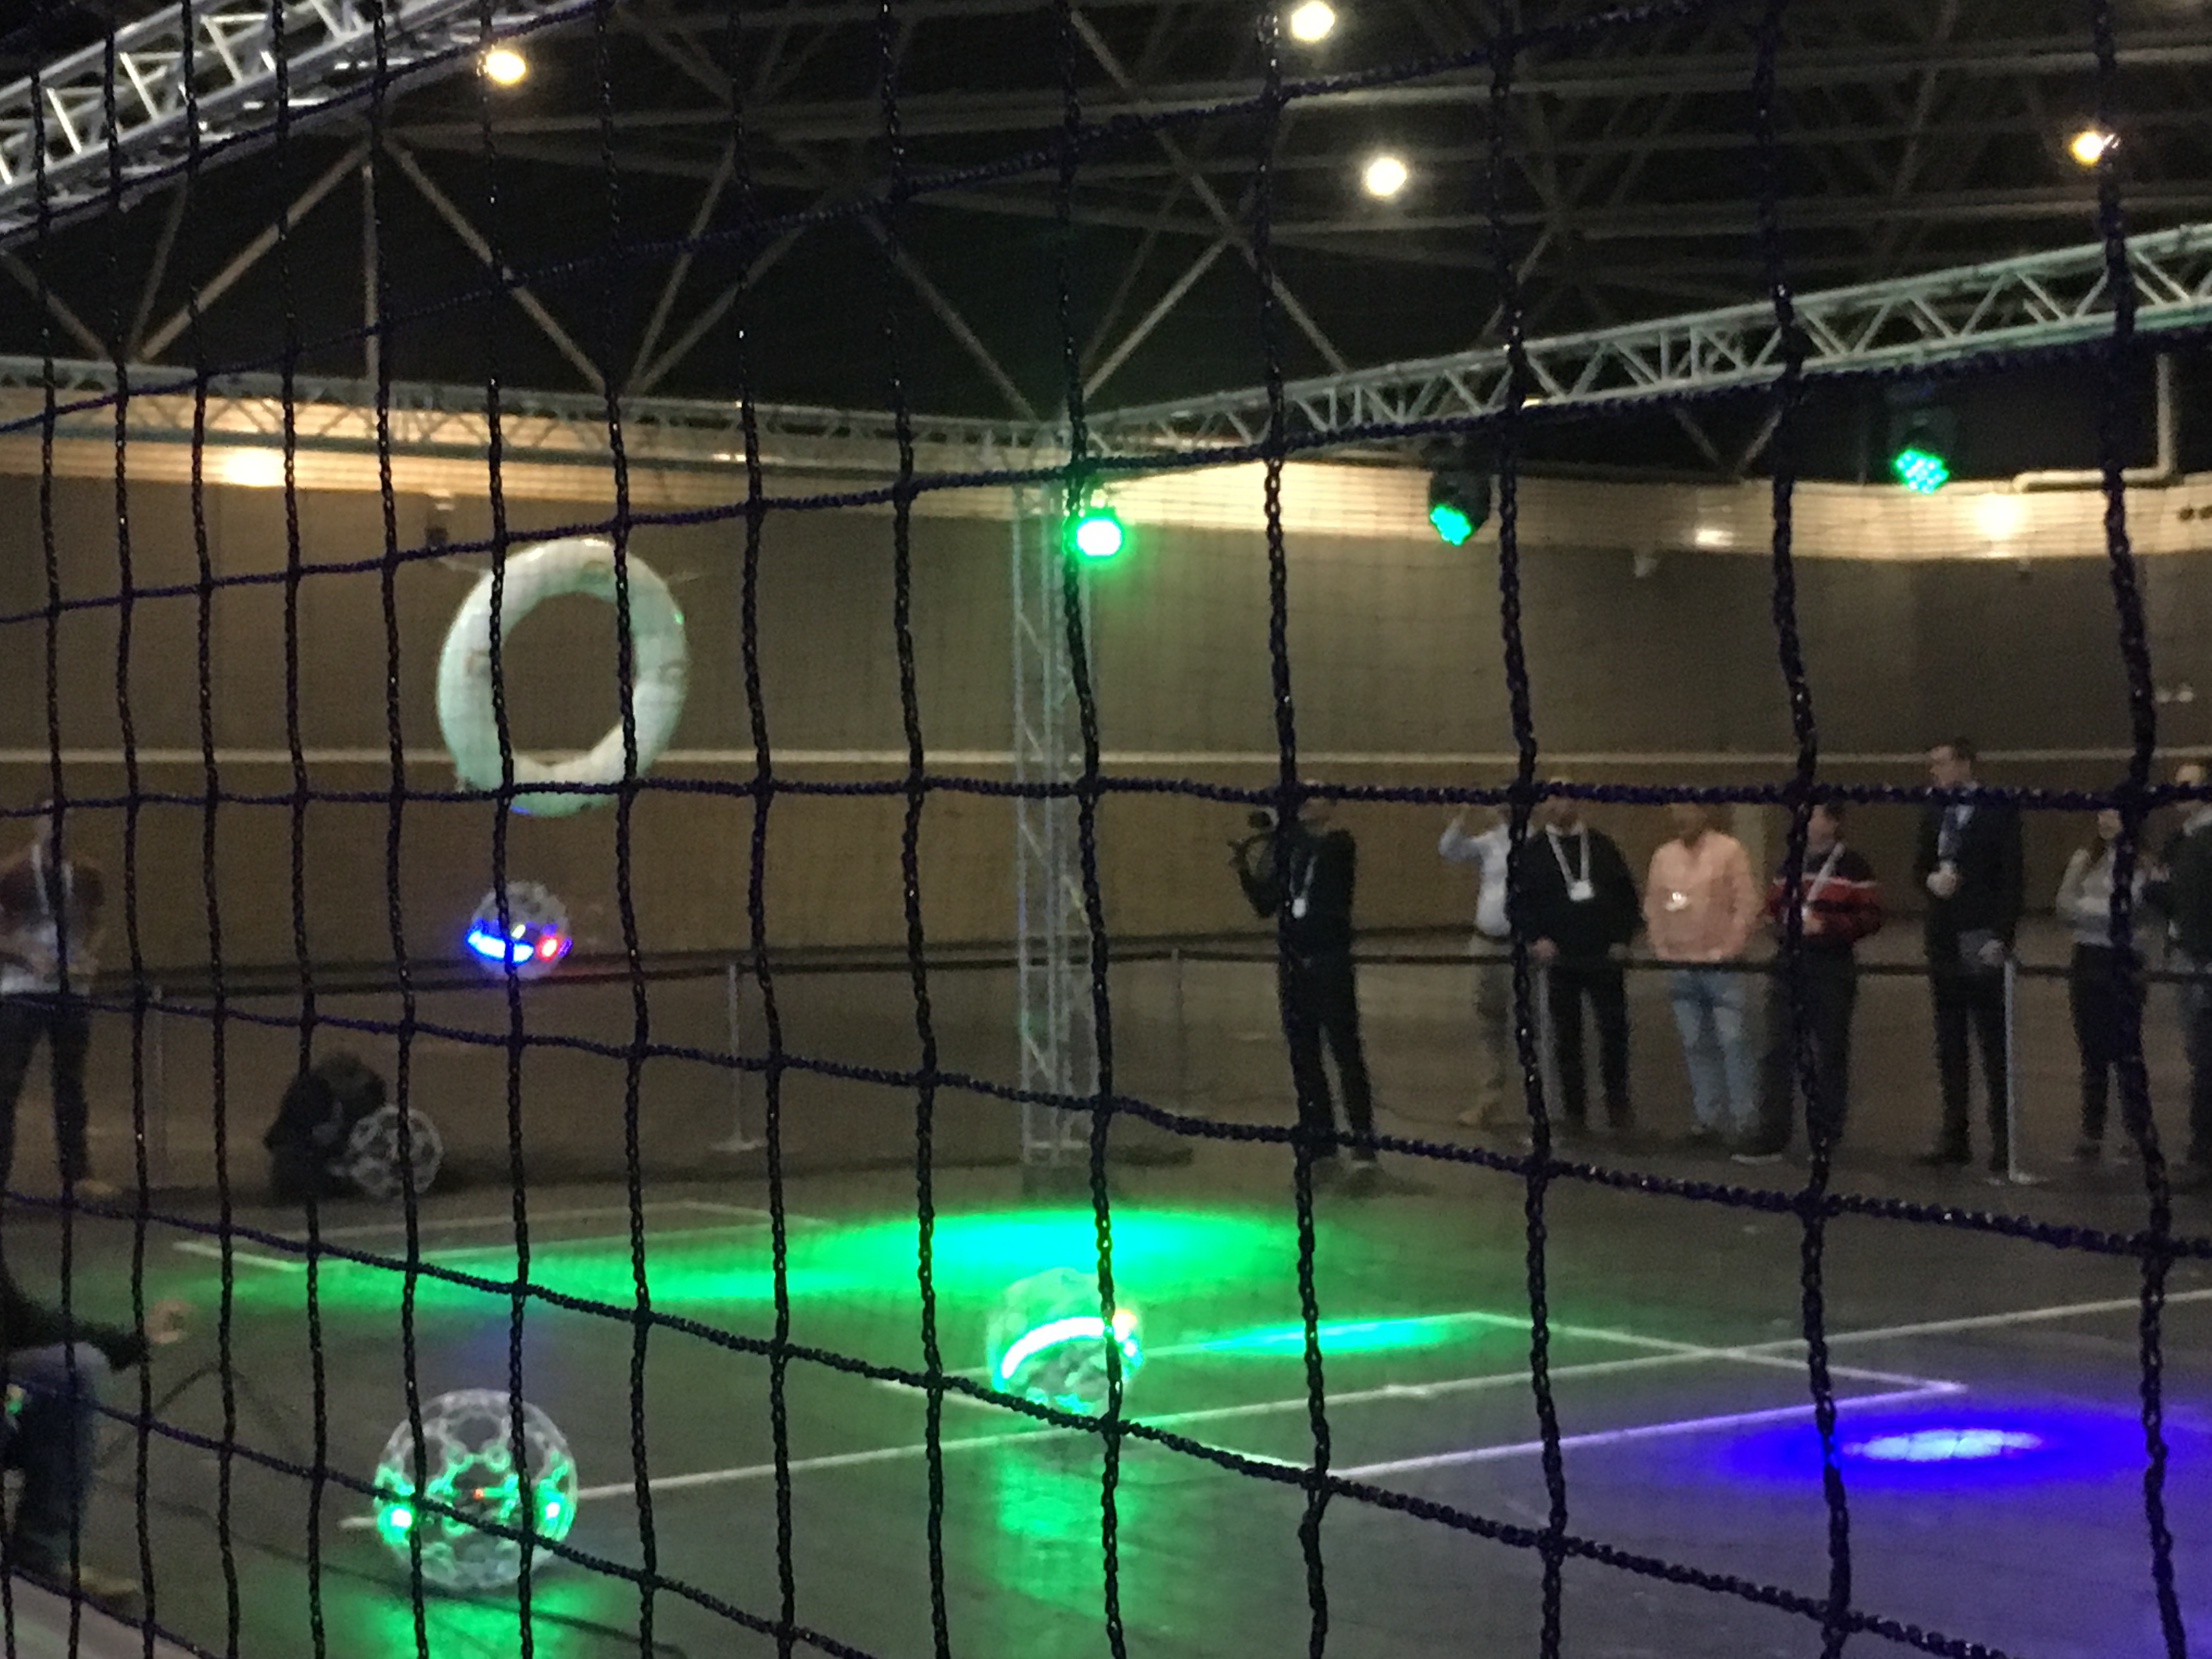 Drone Soccer Comes to the US - DRONELIFE